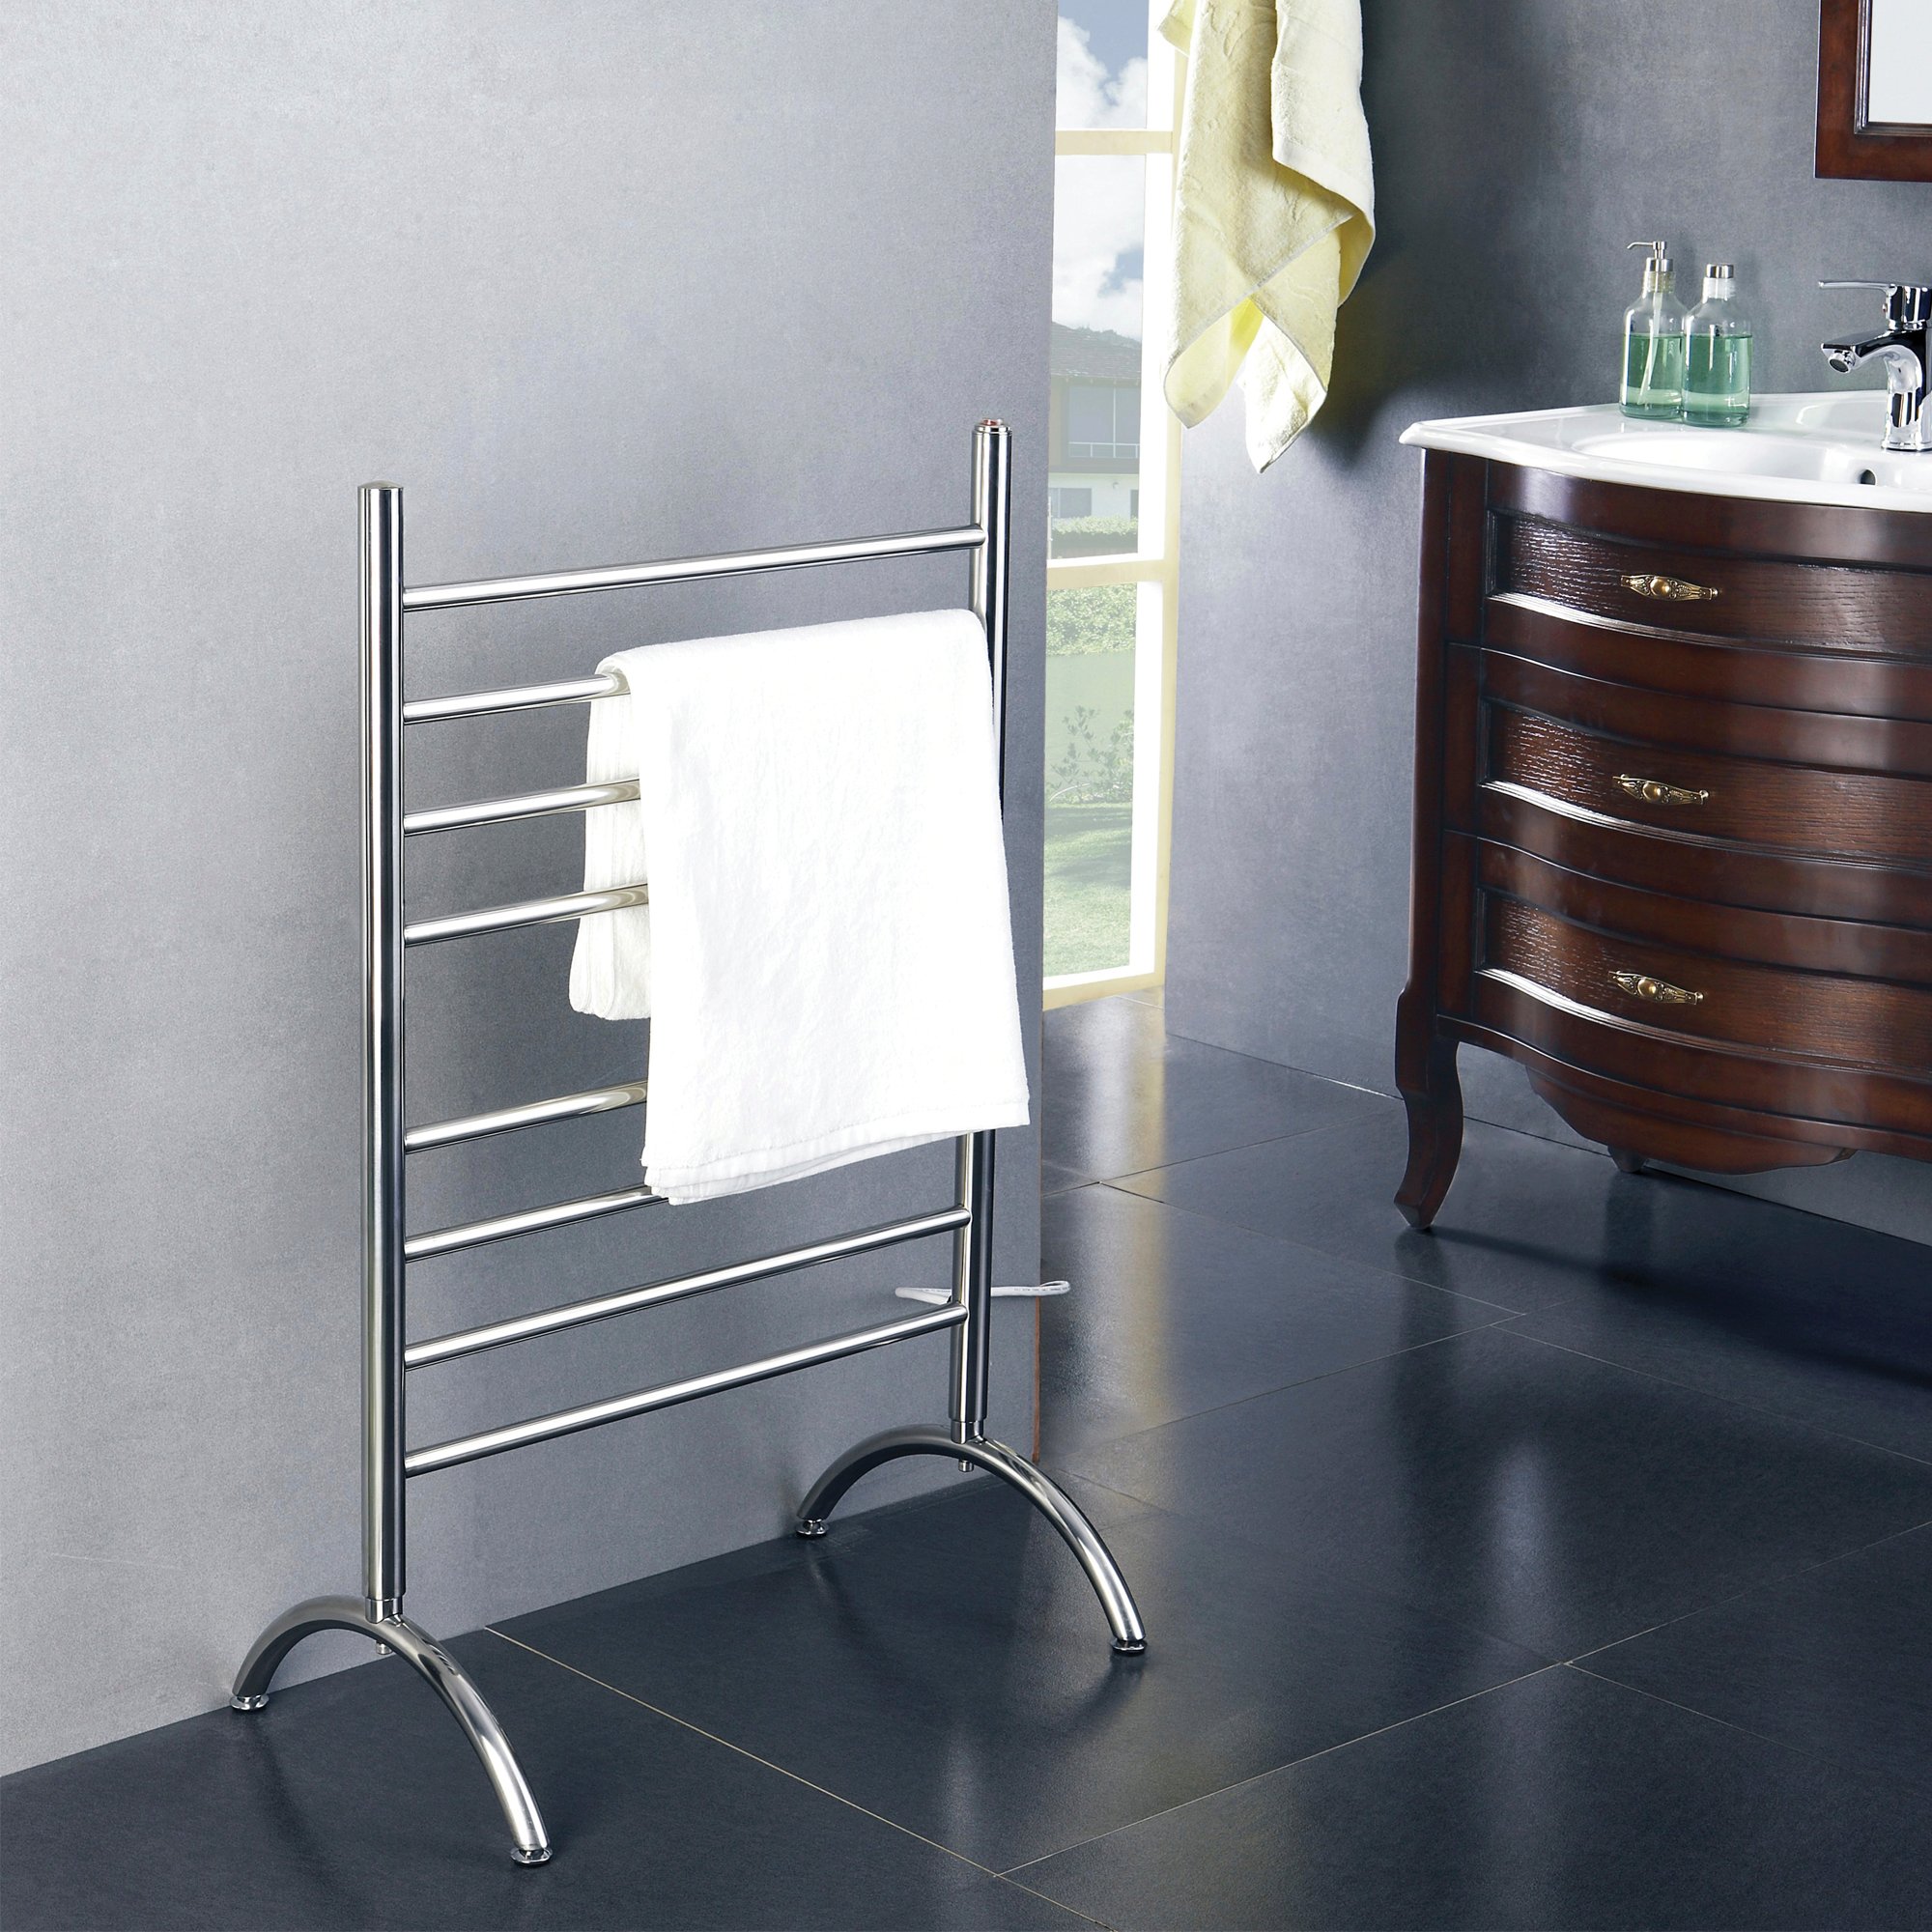 Heat Rails Clothes Drying Rack Free Standing Electric Towel Warmer